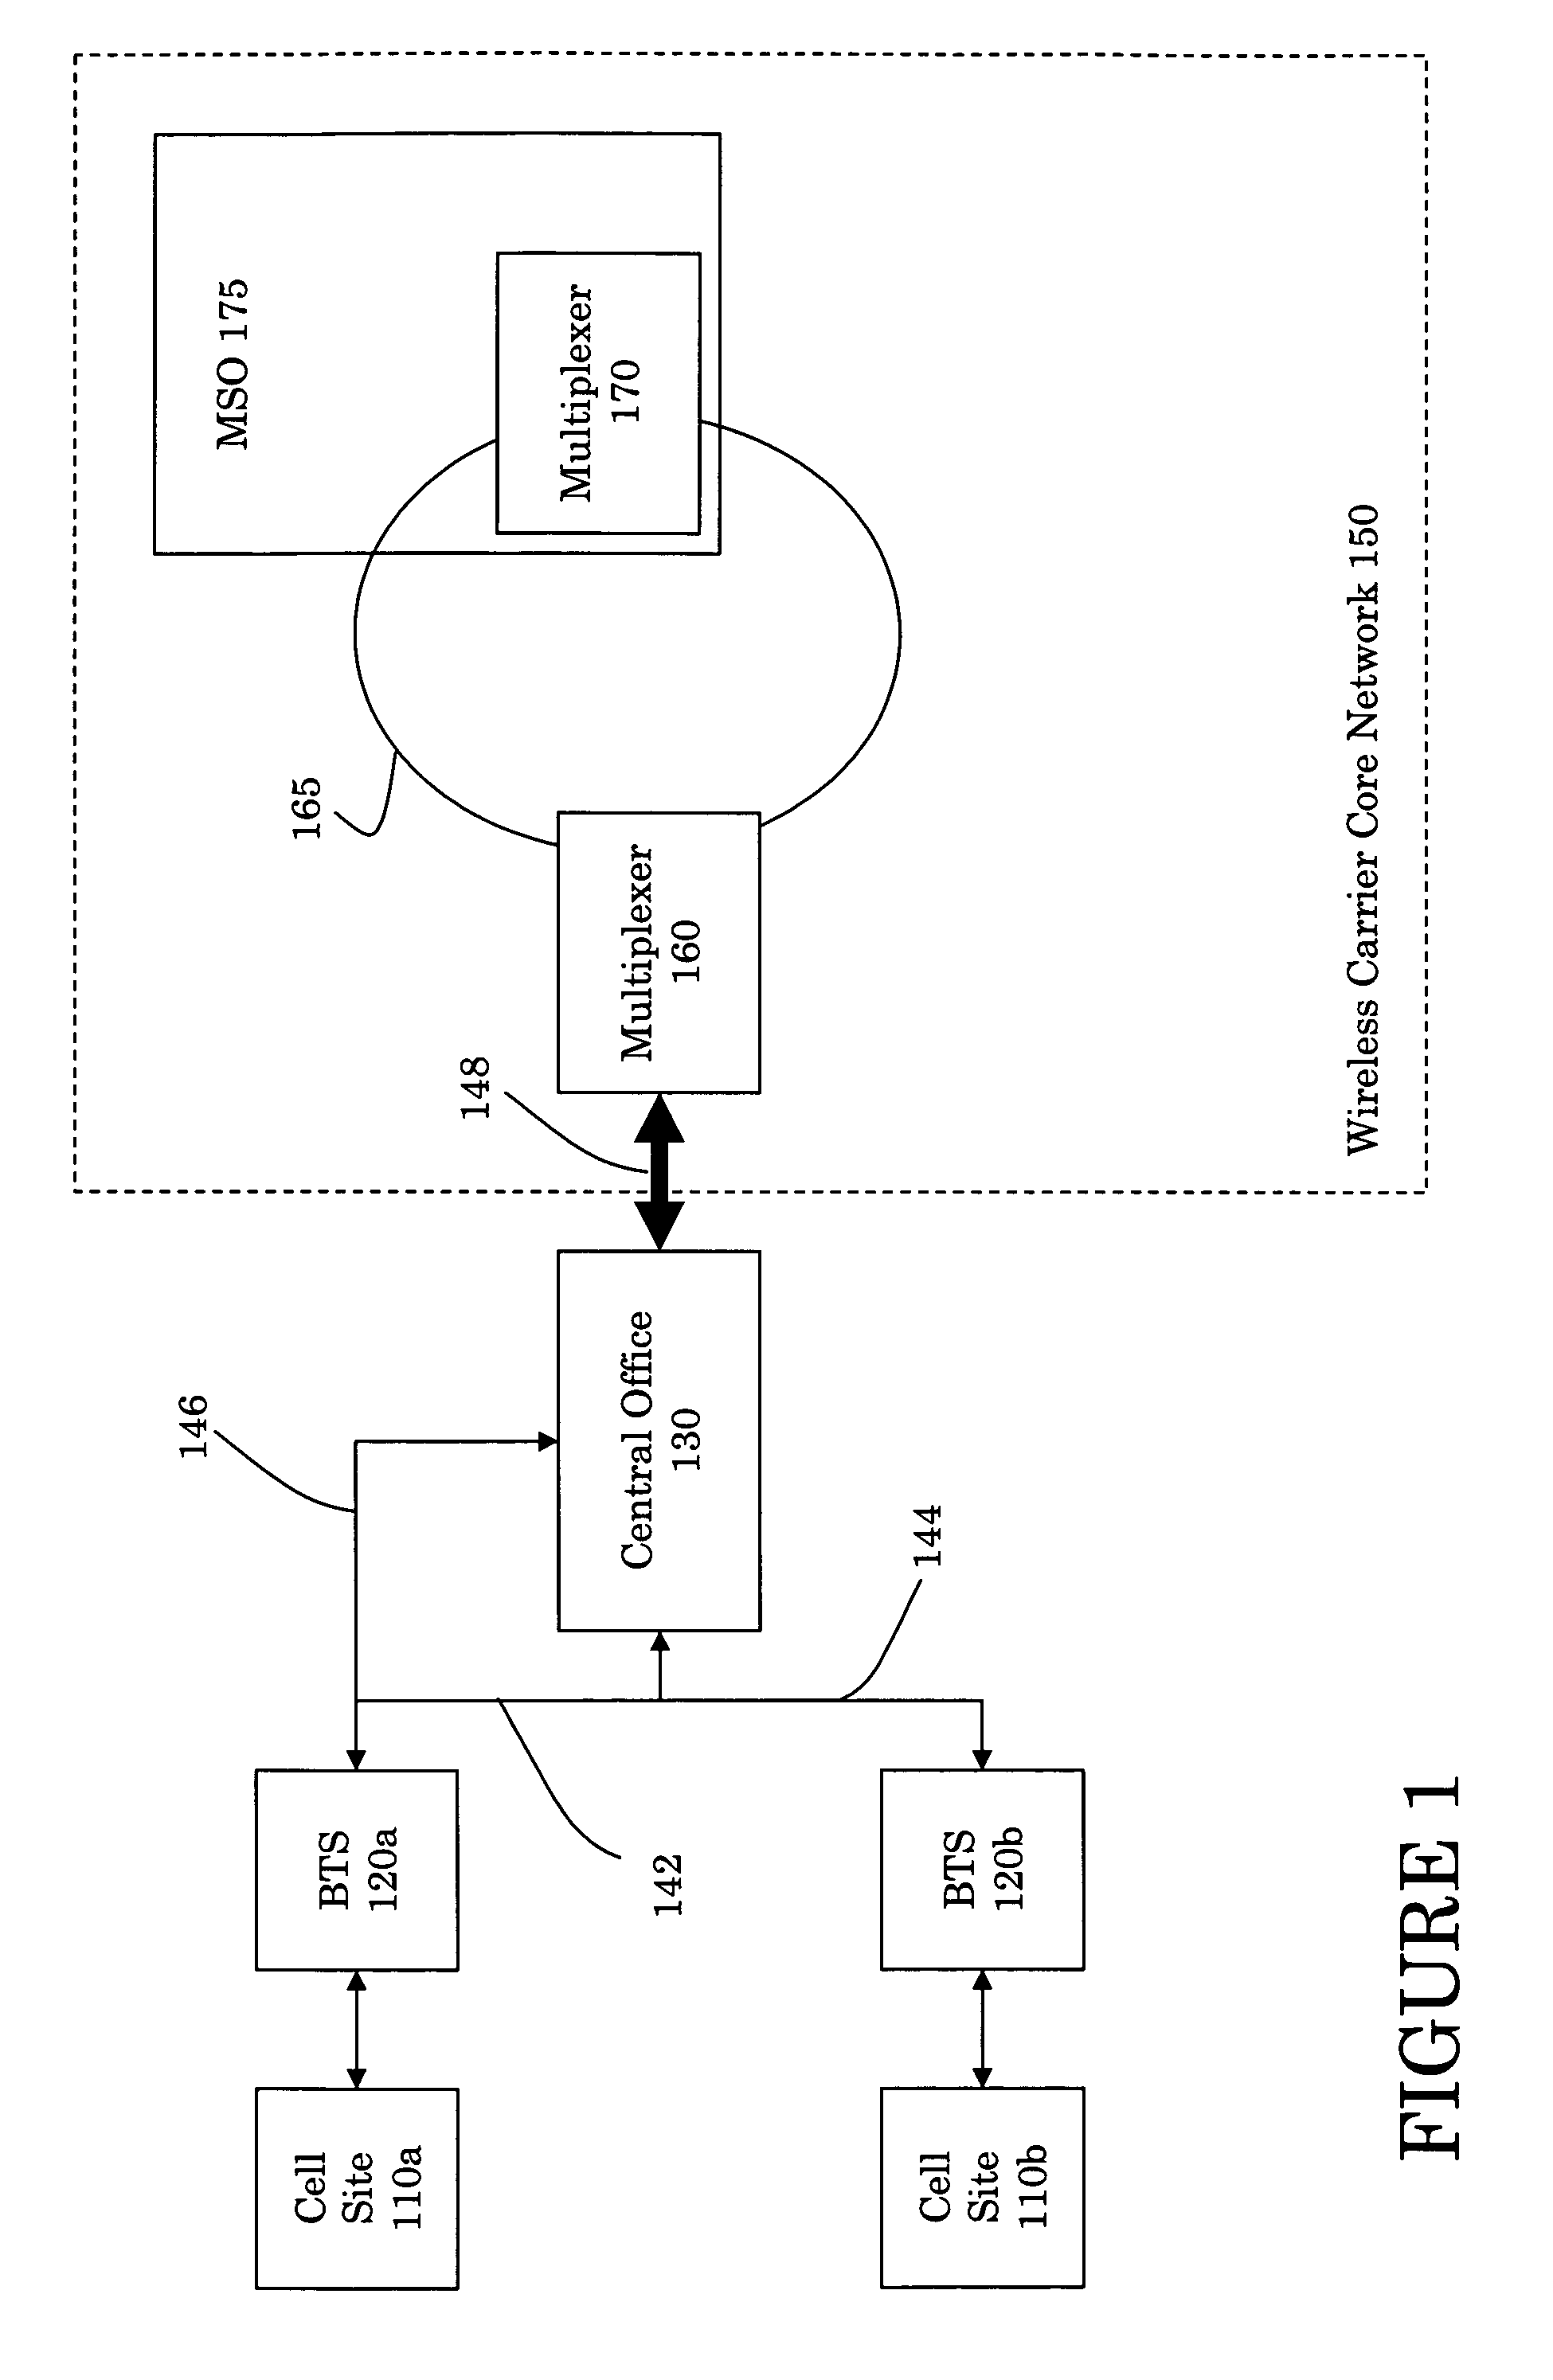 Fault tolerant wireless communication systems and methods